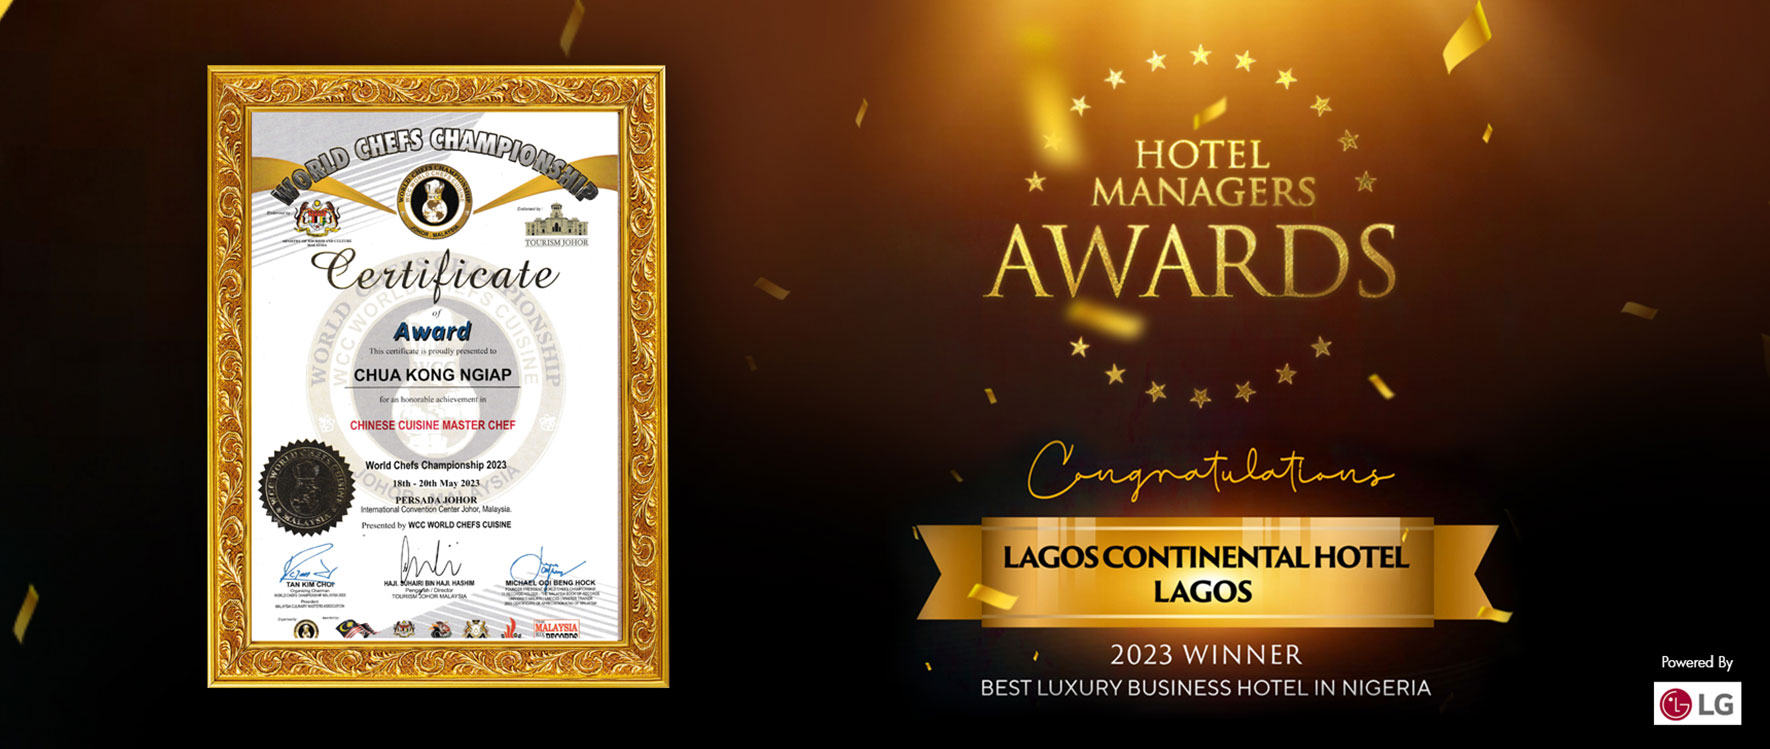 Lagos Continental Wins Two Prestigious Industry Awards for 2023 - Best Luxury Business Hotel in Nigeria at the Hotel Managers Awards and World Chefs Championship 2023 Award for Chef Chua Kong Ngiap
